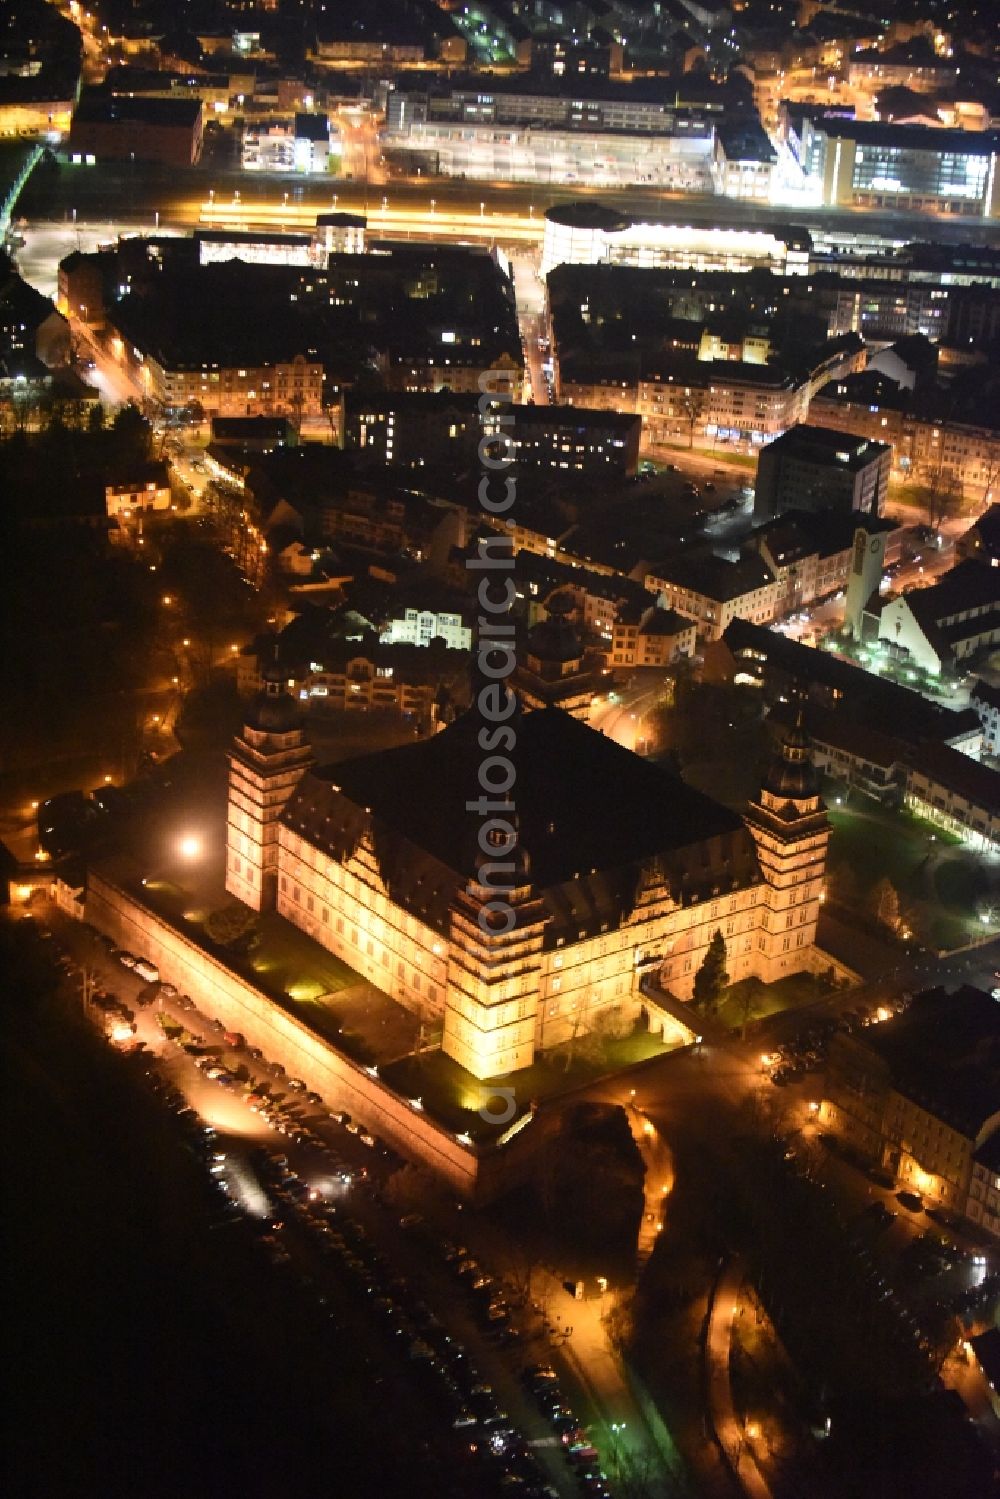 Aschaffenburg at night from above - Night view Building and castle park systems of water castle Johannisburg in Aschaffenburg in the state Bavaria